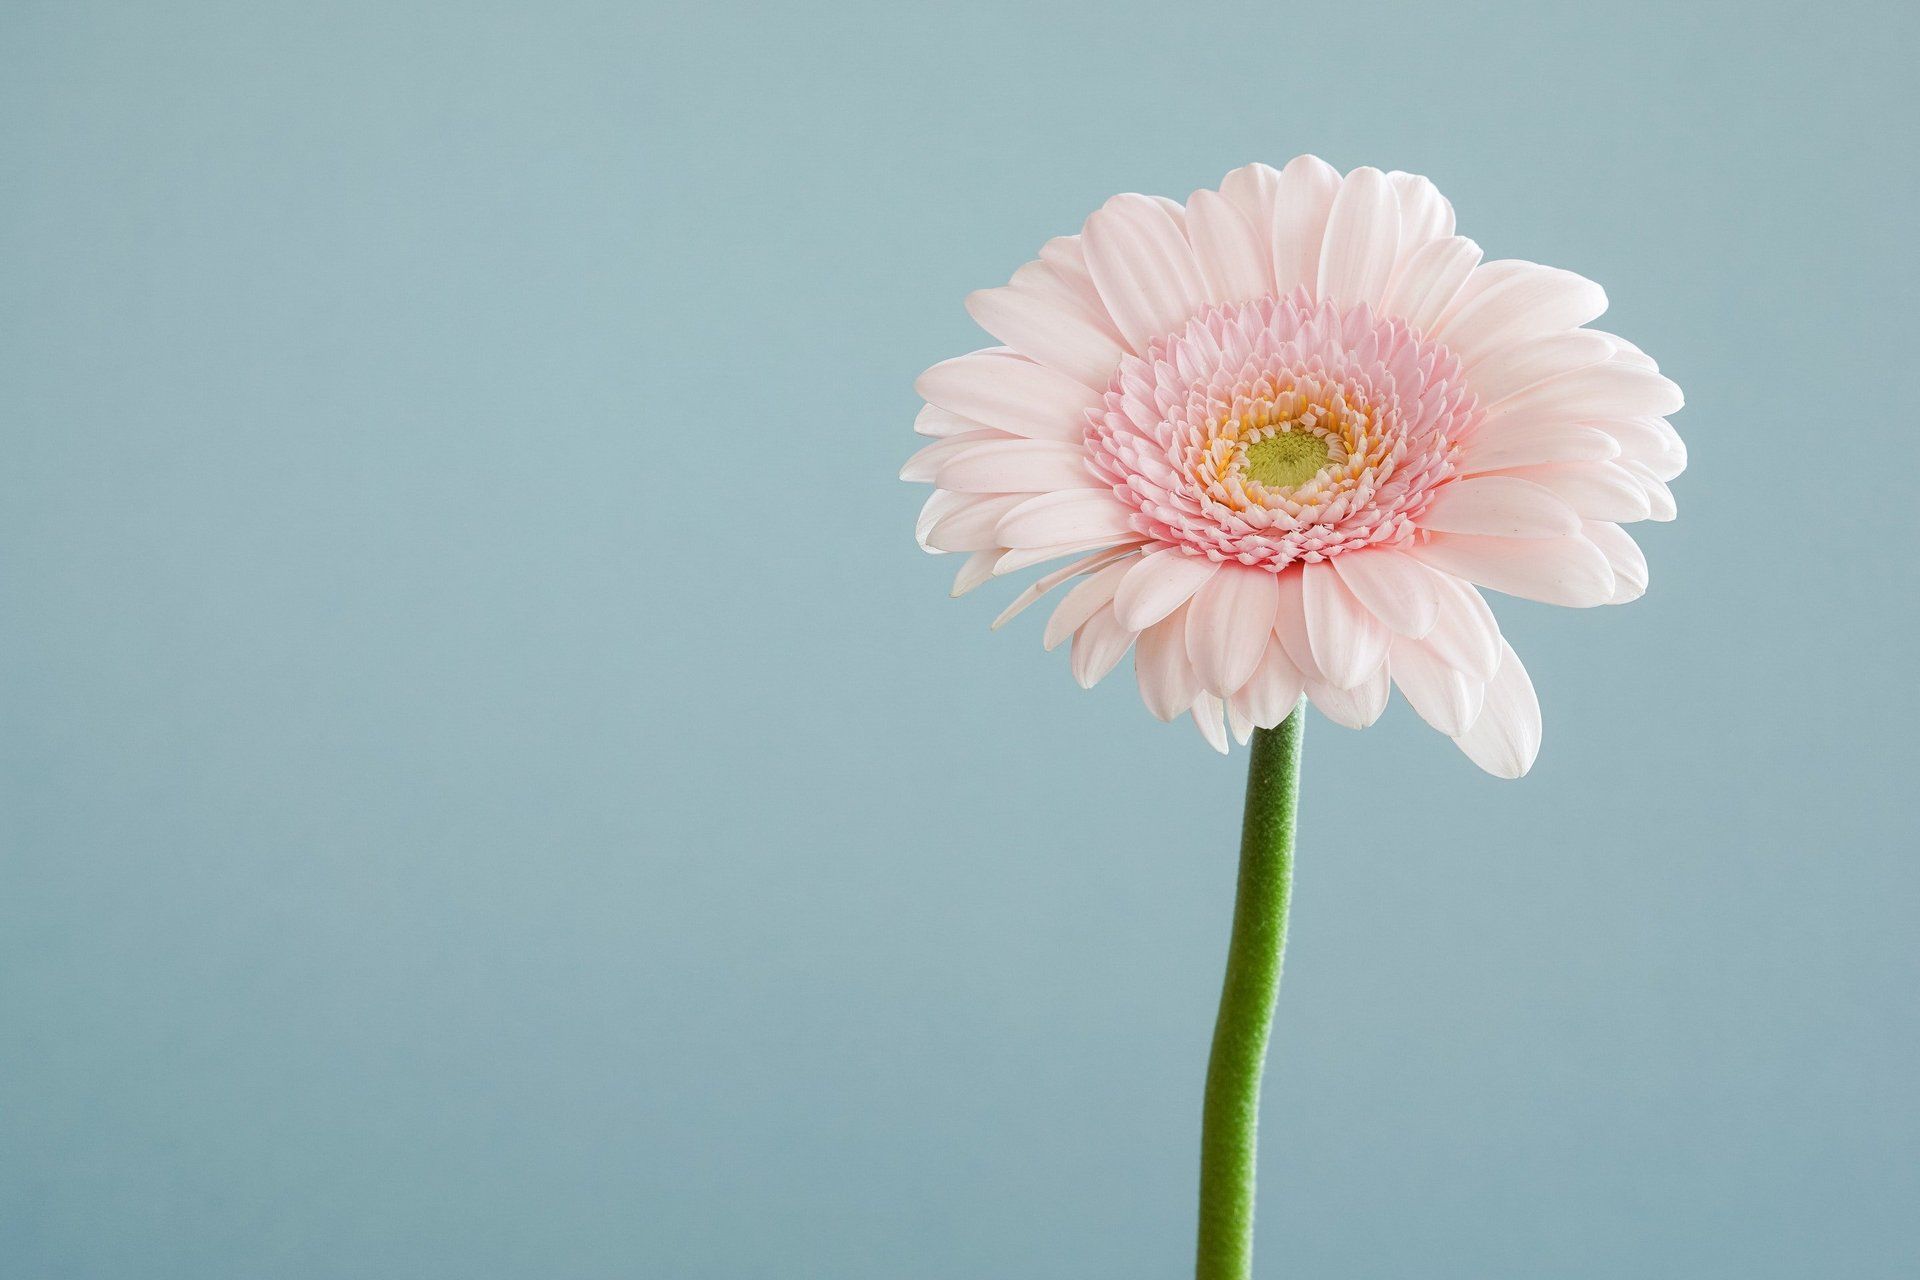 A single pink flower with a green stem on a blue background.